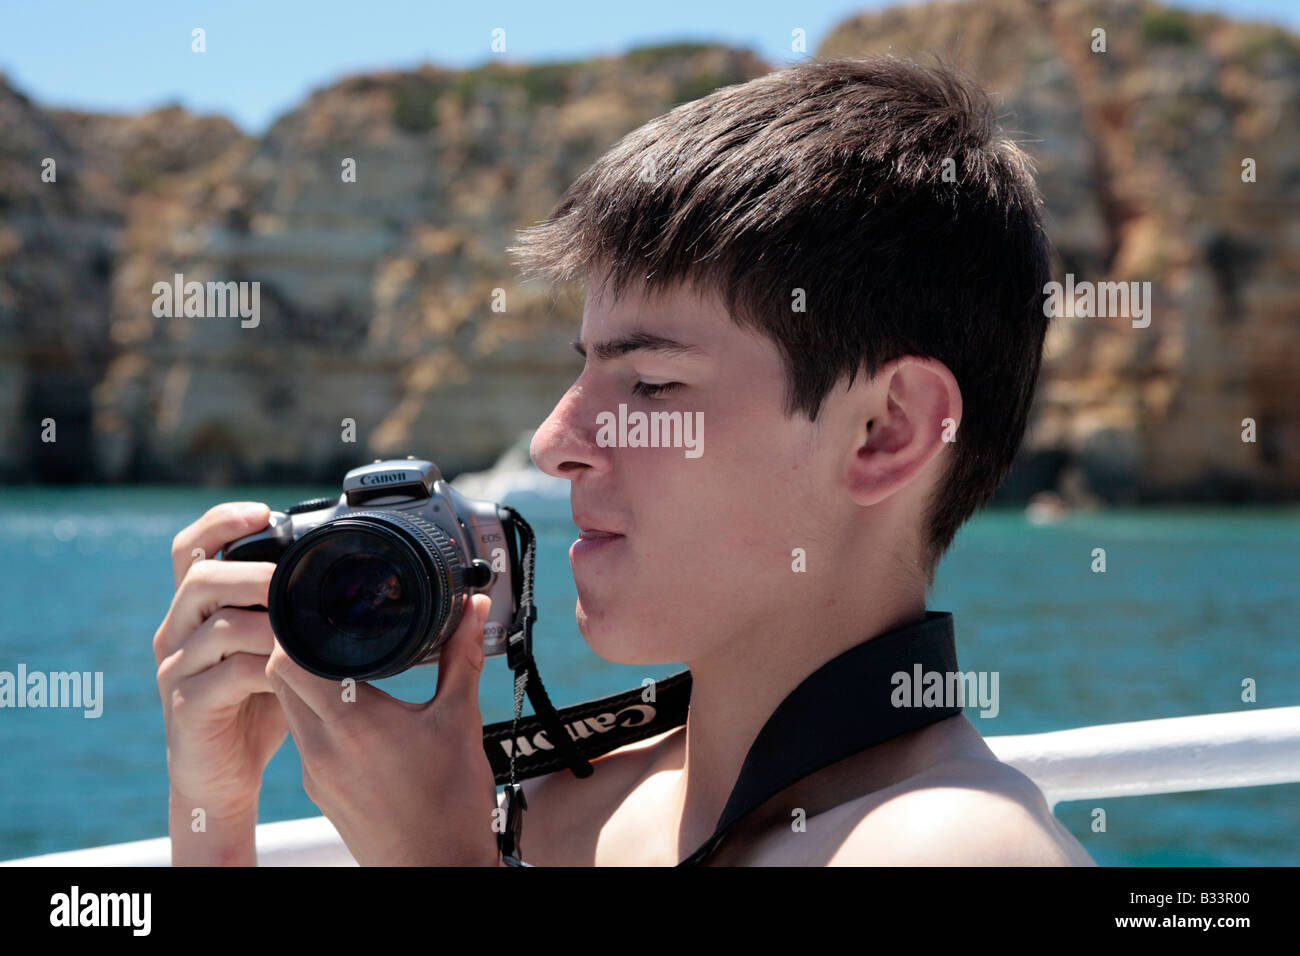 portrait of a teenager with a camera Stock Photo